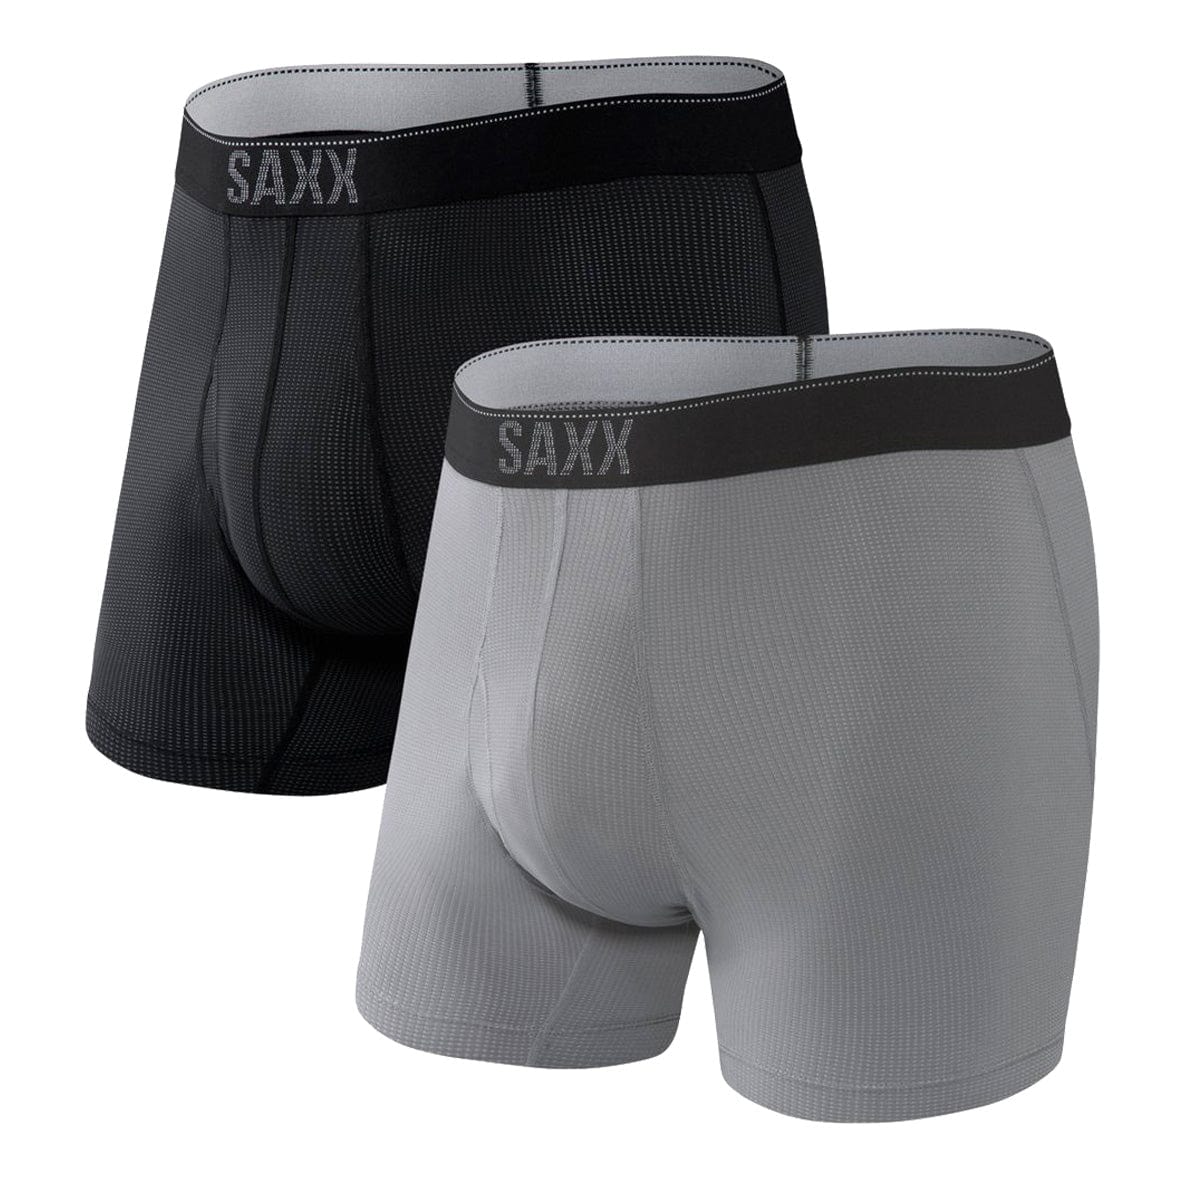 Saxx Quest Boxers - Black / Dark Charcoal (2 Pack)